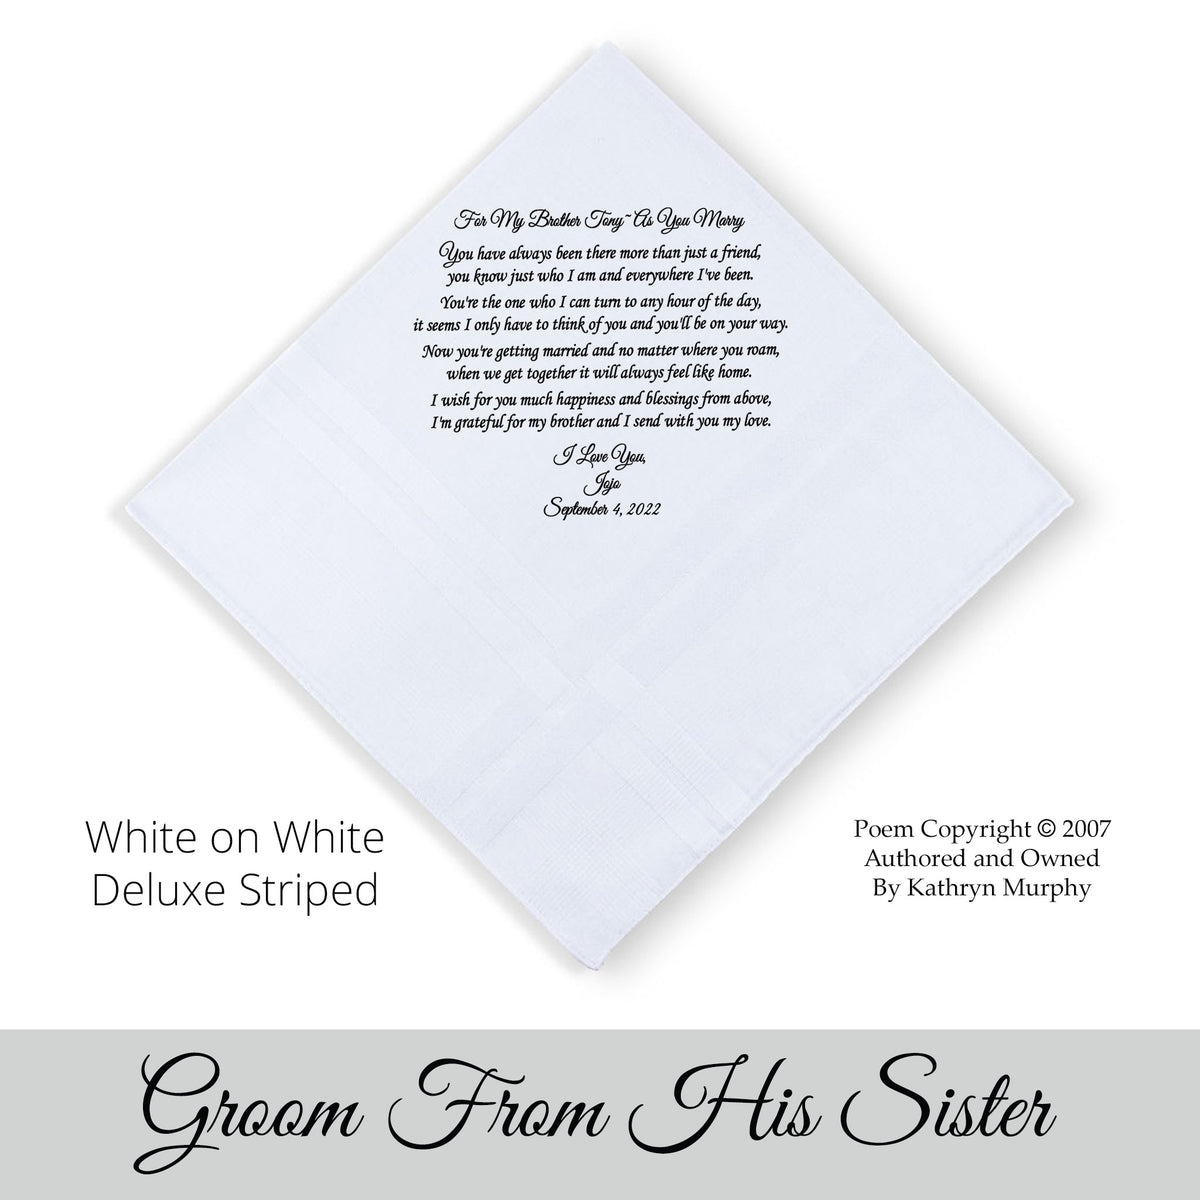 Personalized printed Handkerchief for the groom from his Sister &quot;To My Brother As You Marry&quot;